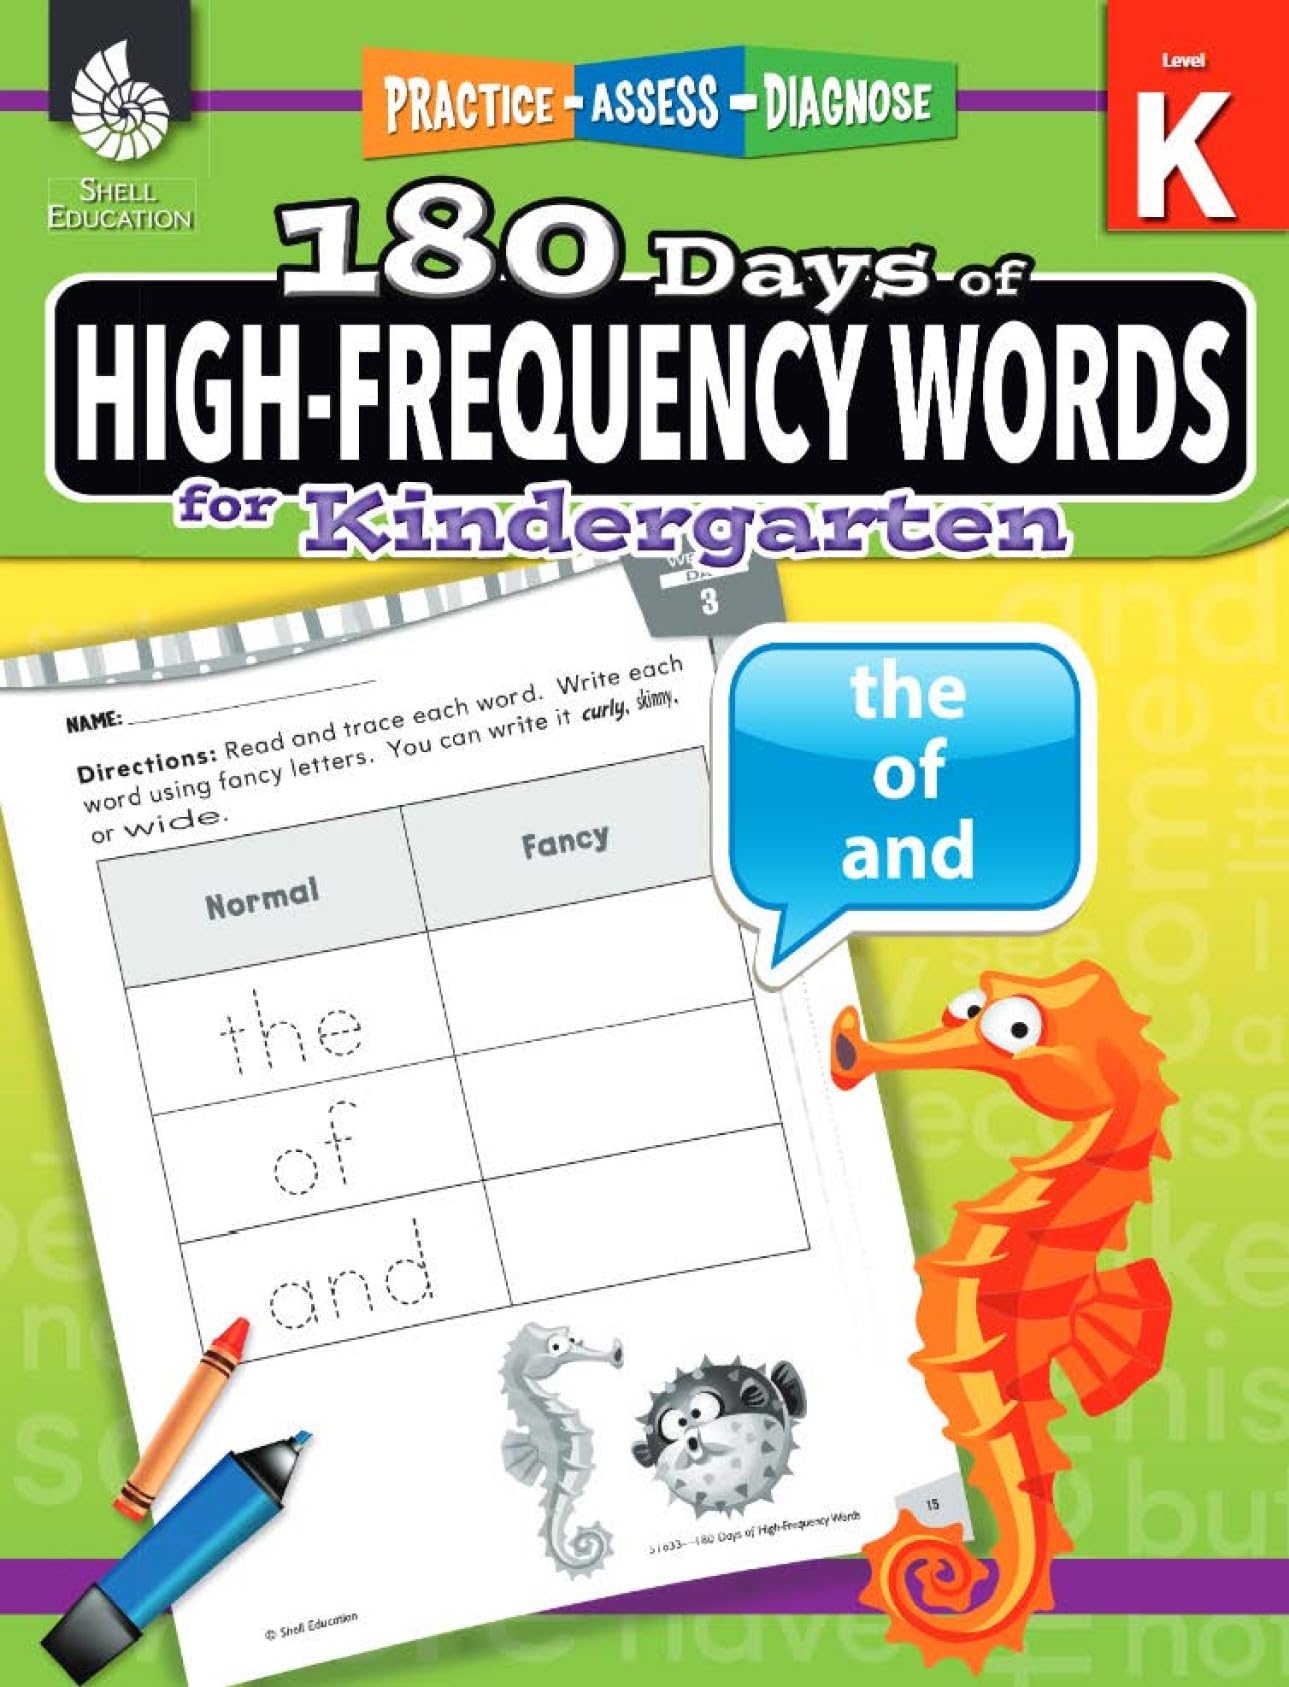 180 Days of High-Frequency Words for Kindergarten - Learn to Read Kindergarten Workbook - Improves Sight Words Recognition and Reading Comprehension for Grade K, Ages 4 to 6 (180 Days of Practice) - 4713